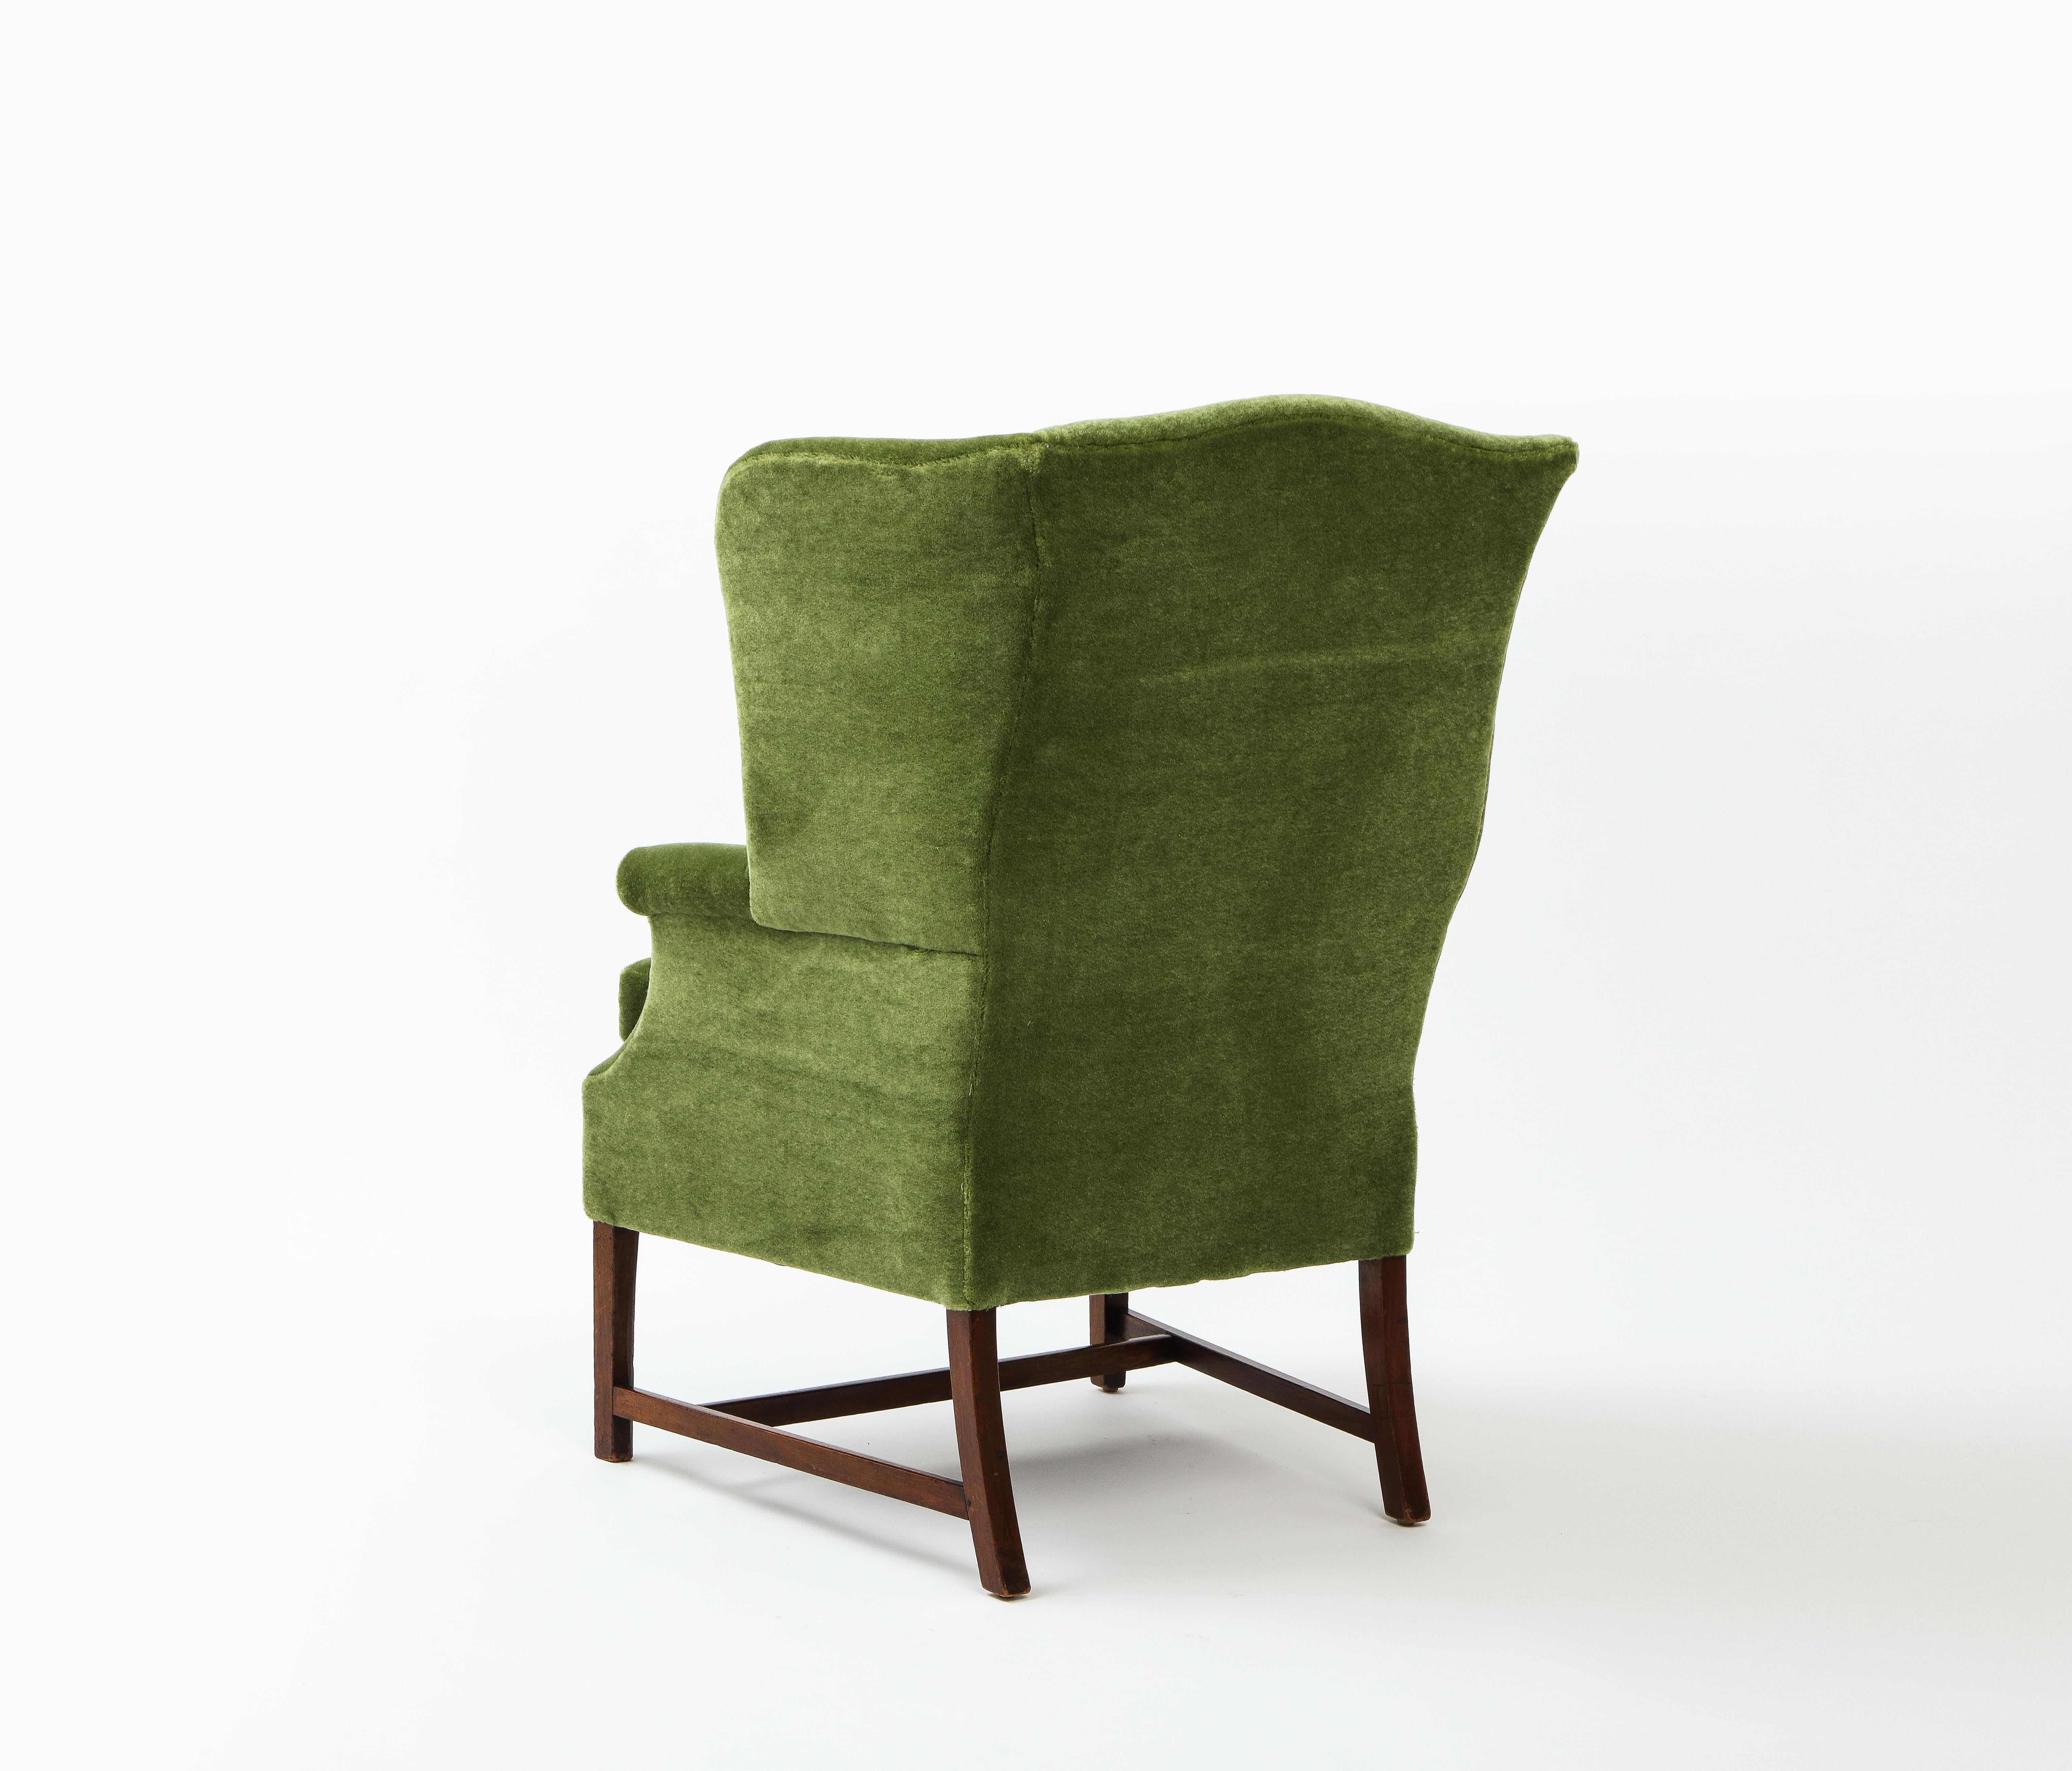 Wingback Library Chair in Green Pierre Frey Mohair, England late 19th Century 2